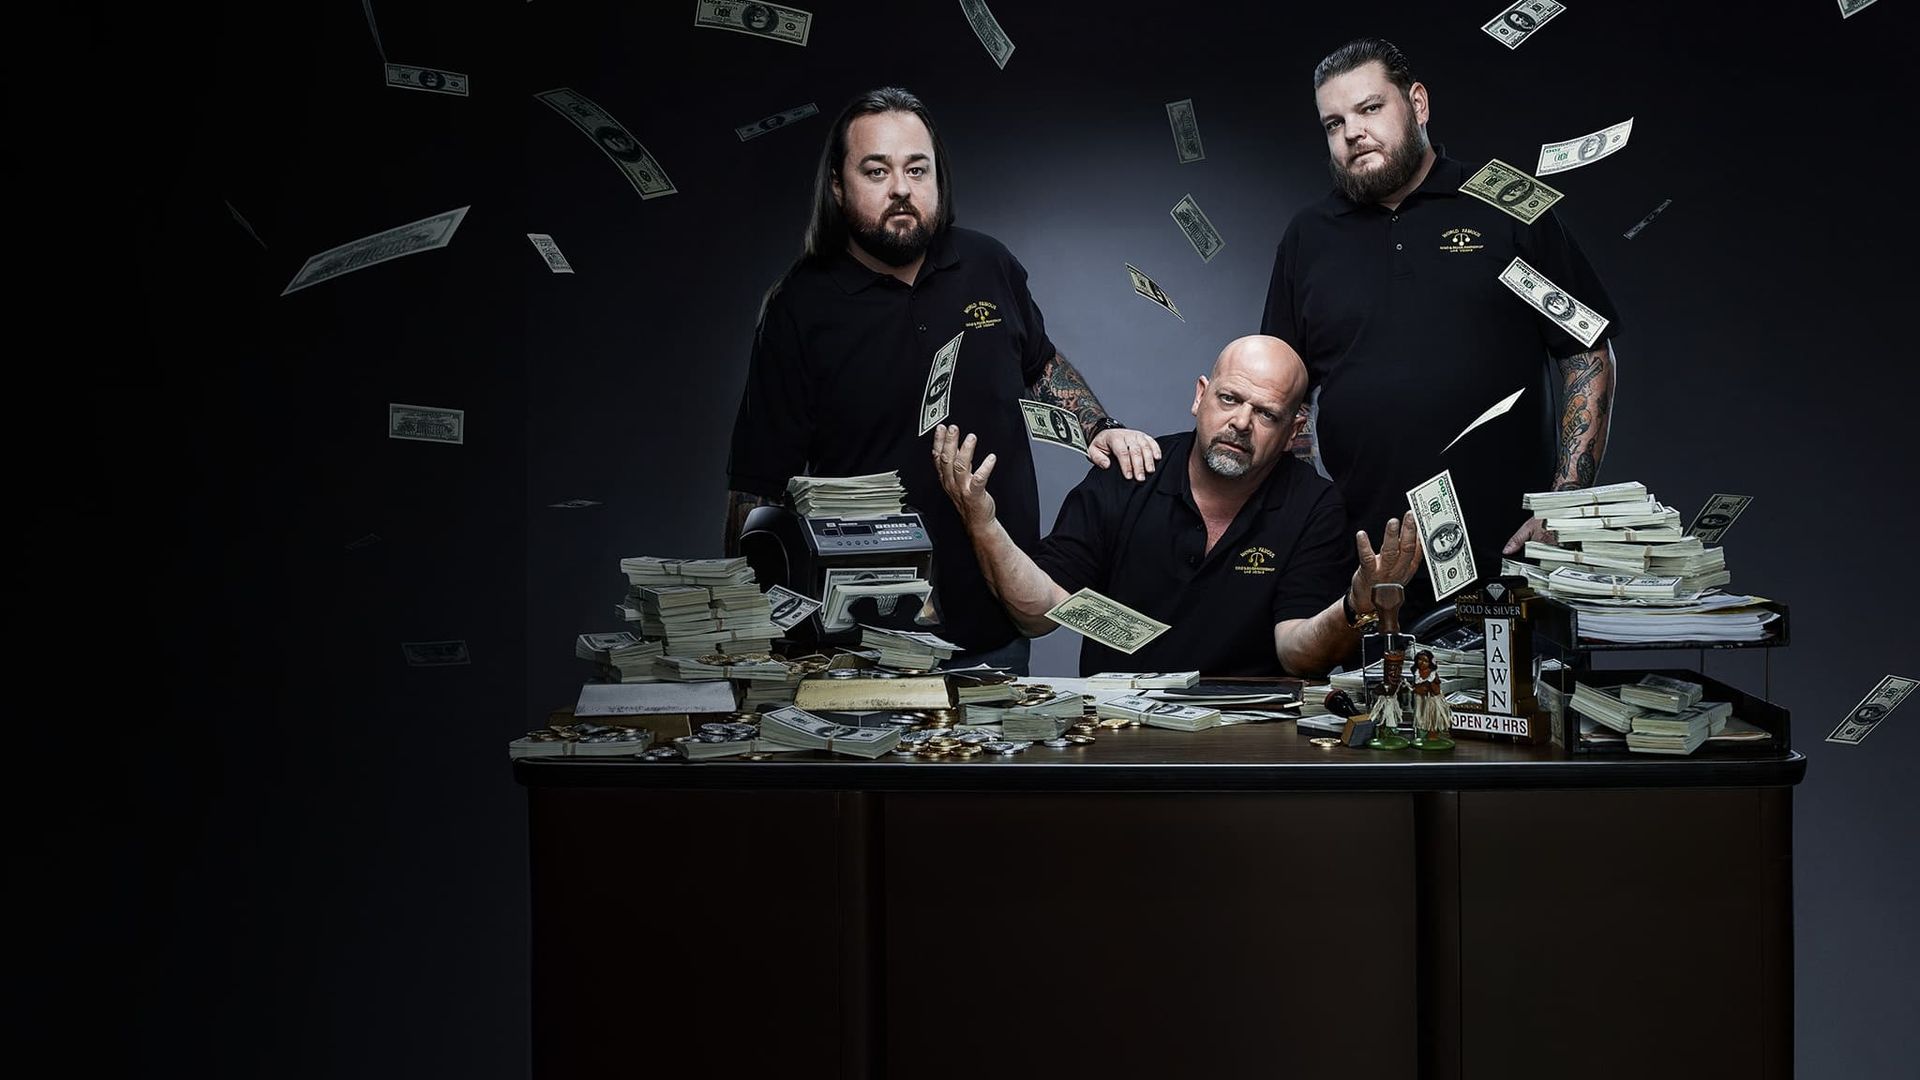 The Best of Pawn Stars